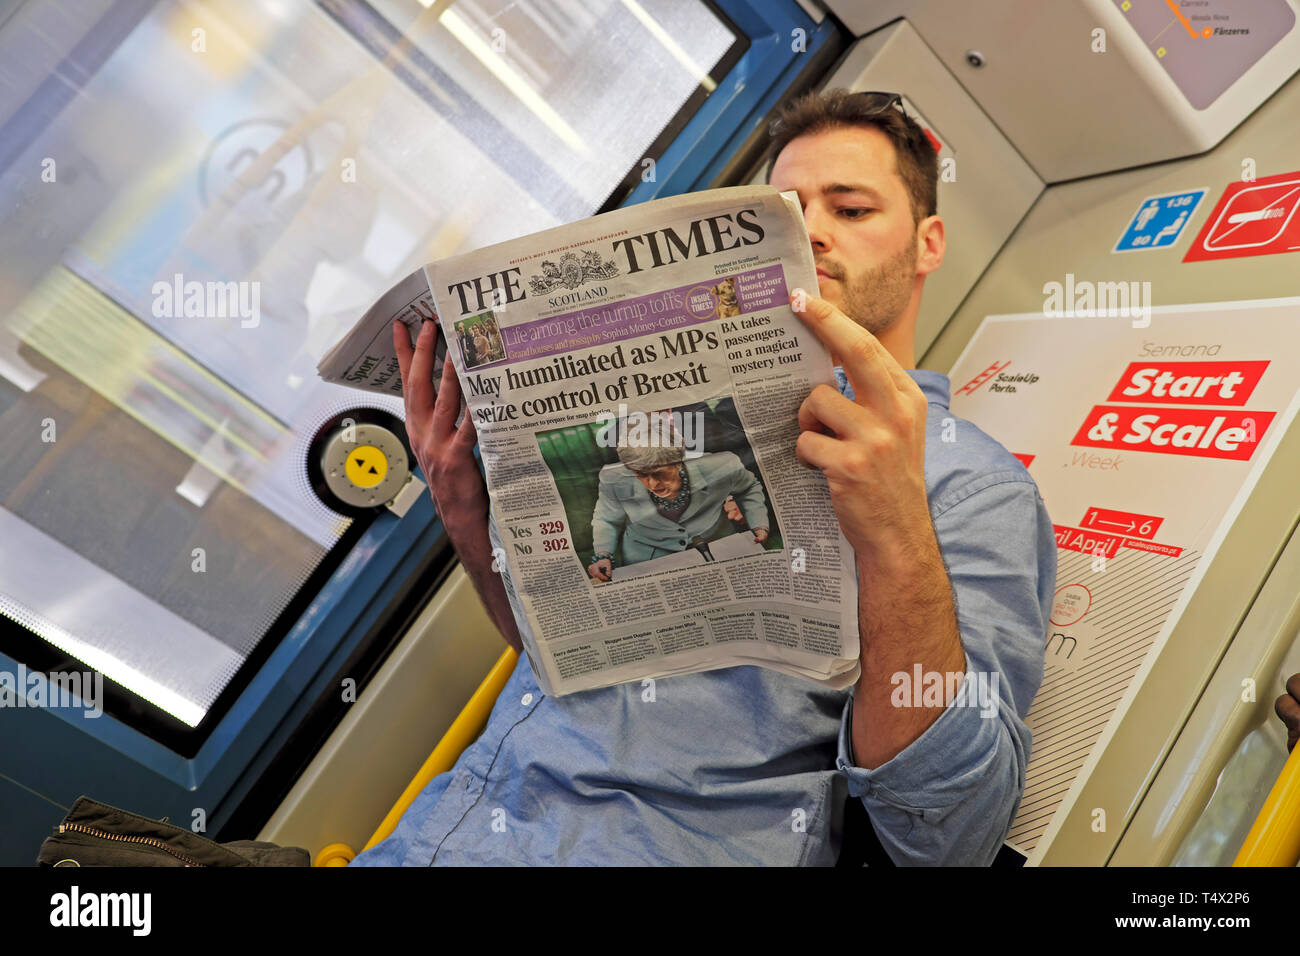 Man reading on train in Europe 'May humiliated as MPs seize control of Brexit' The Times newspaper headline 26 March 2019 Porto Portugal KATHY DEWITT Stock Photo